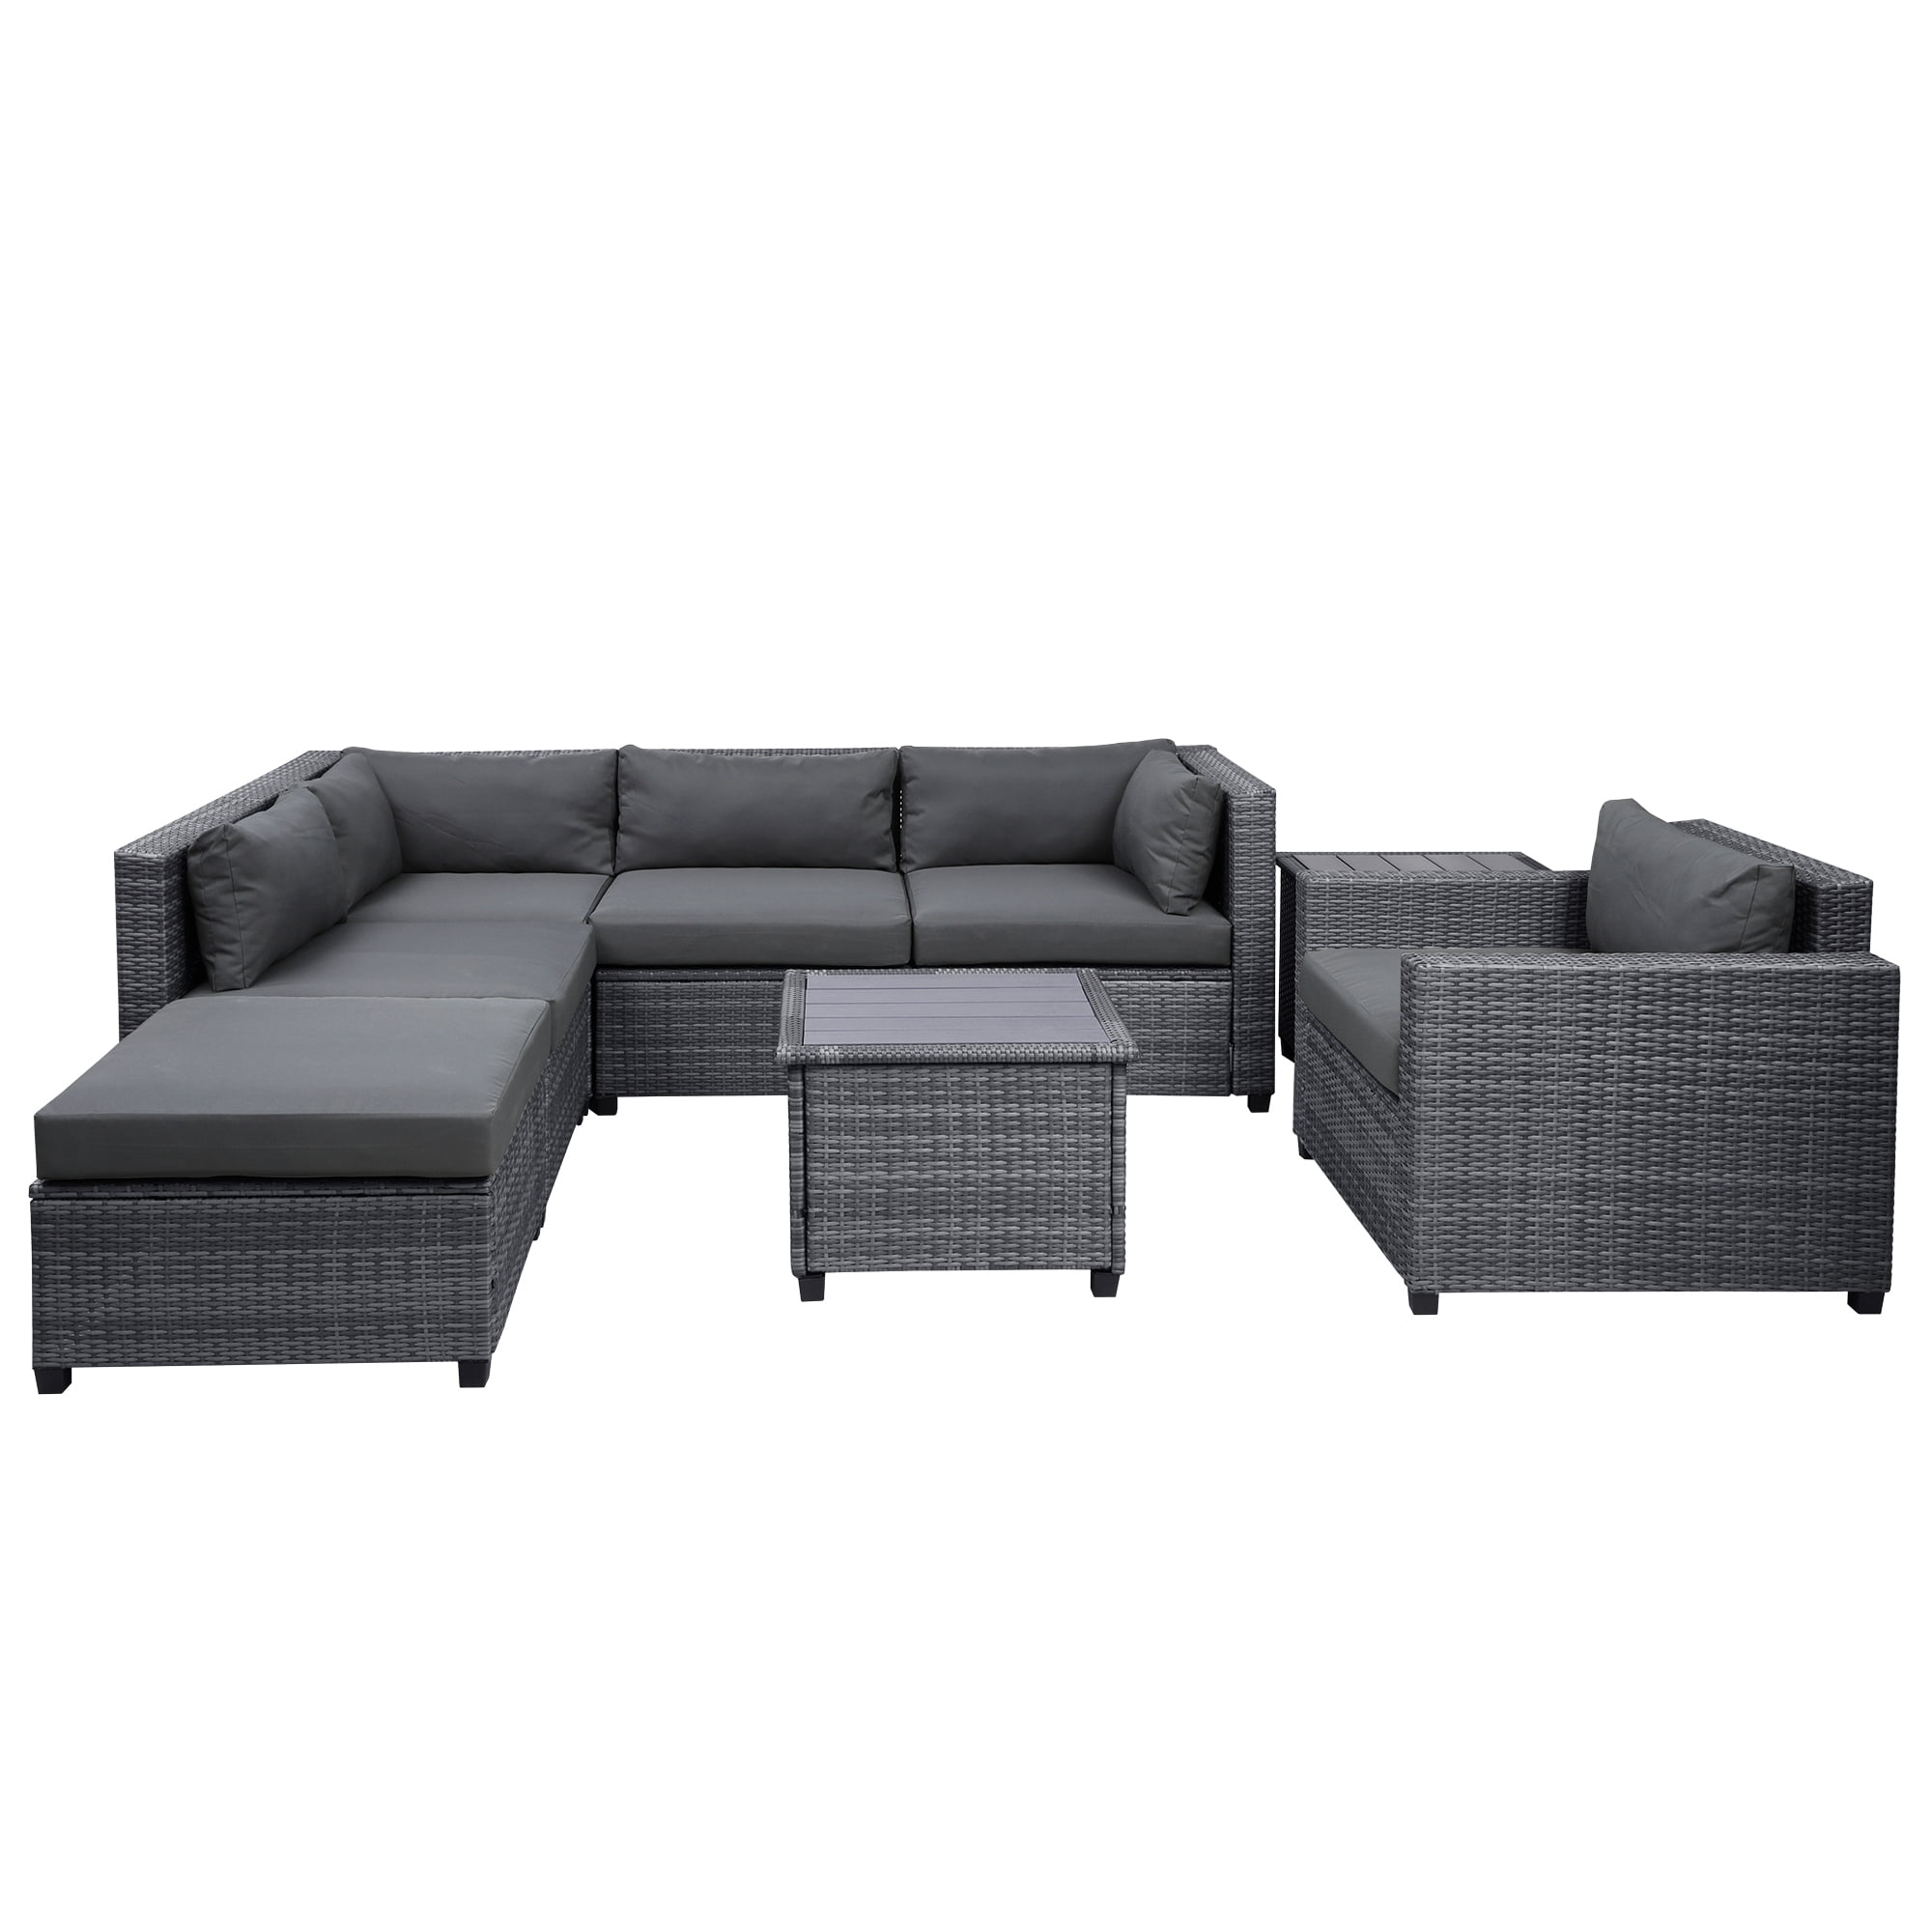 8 & Couch All-Weather 2 Sofa Patio Pool Cushions Piece Garden Deck Morden Furniture Tables, Coffee Sectional Set, for Seating Rattan Set Set, Outdoor Wicker Sectional Group with Conversation